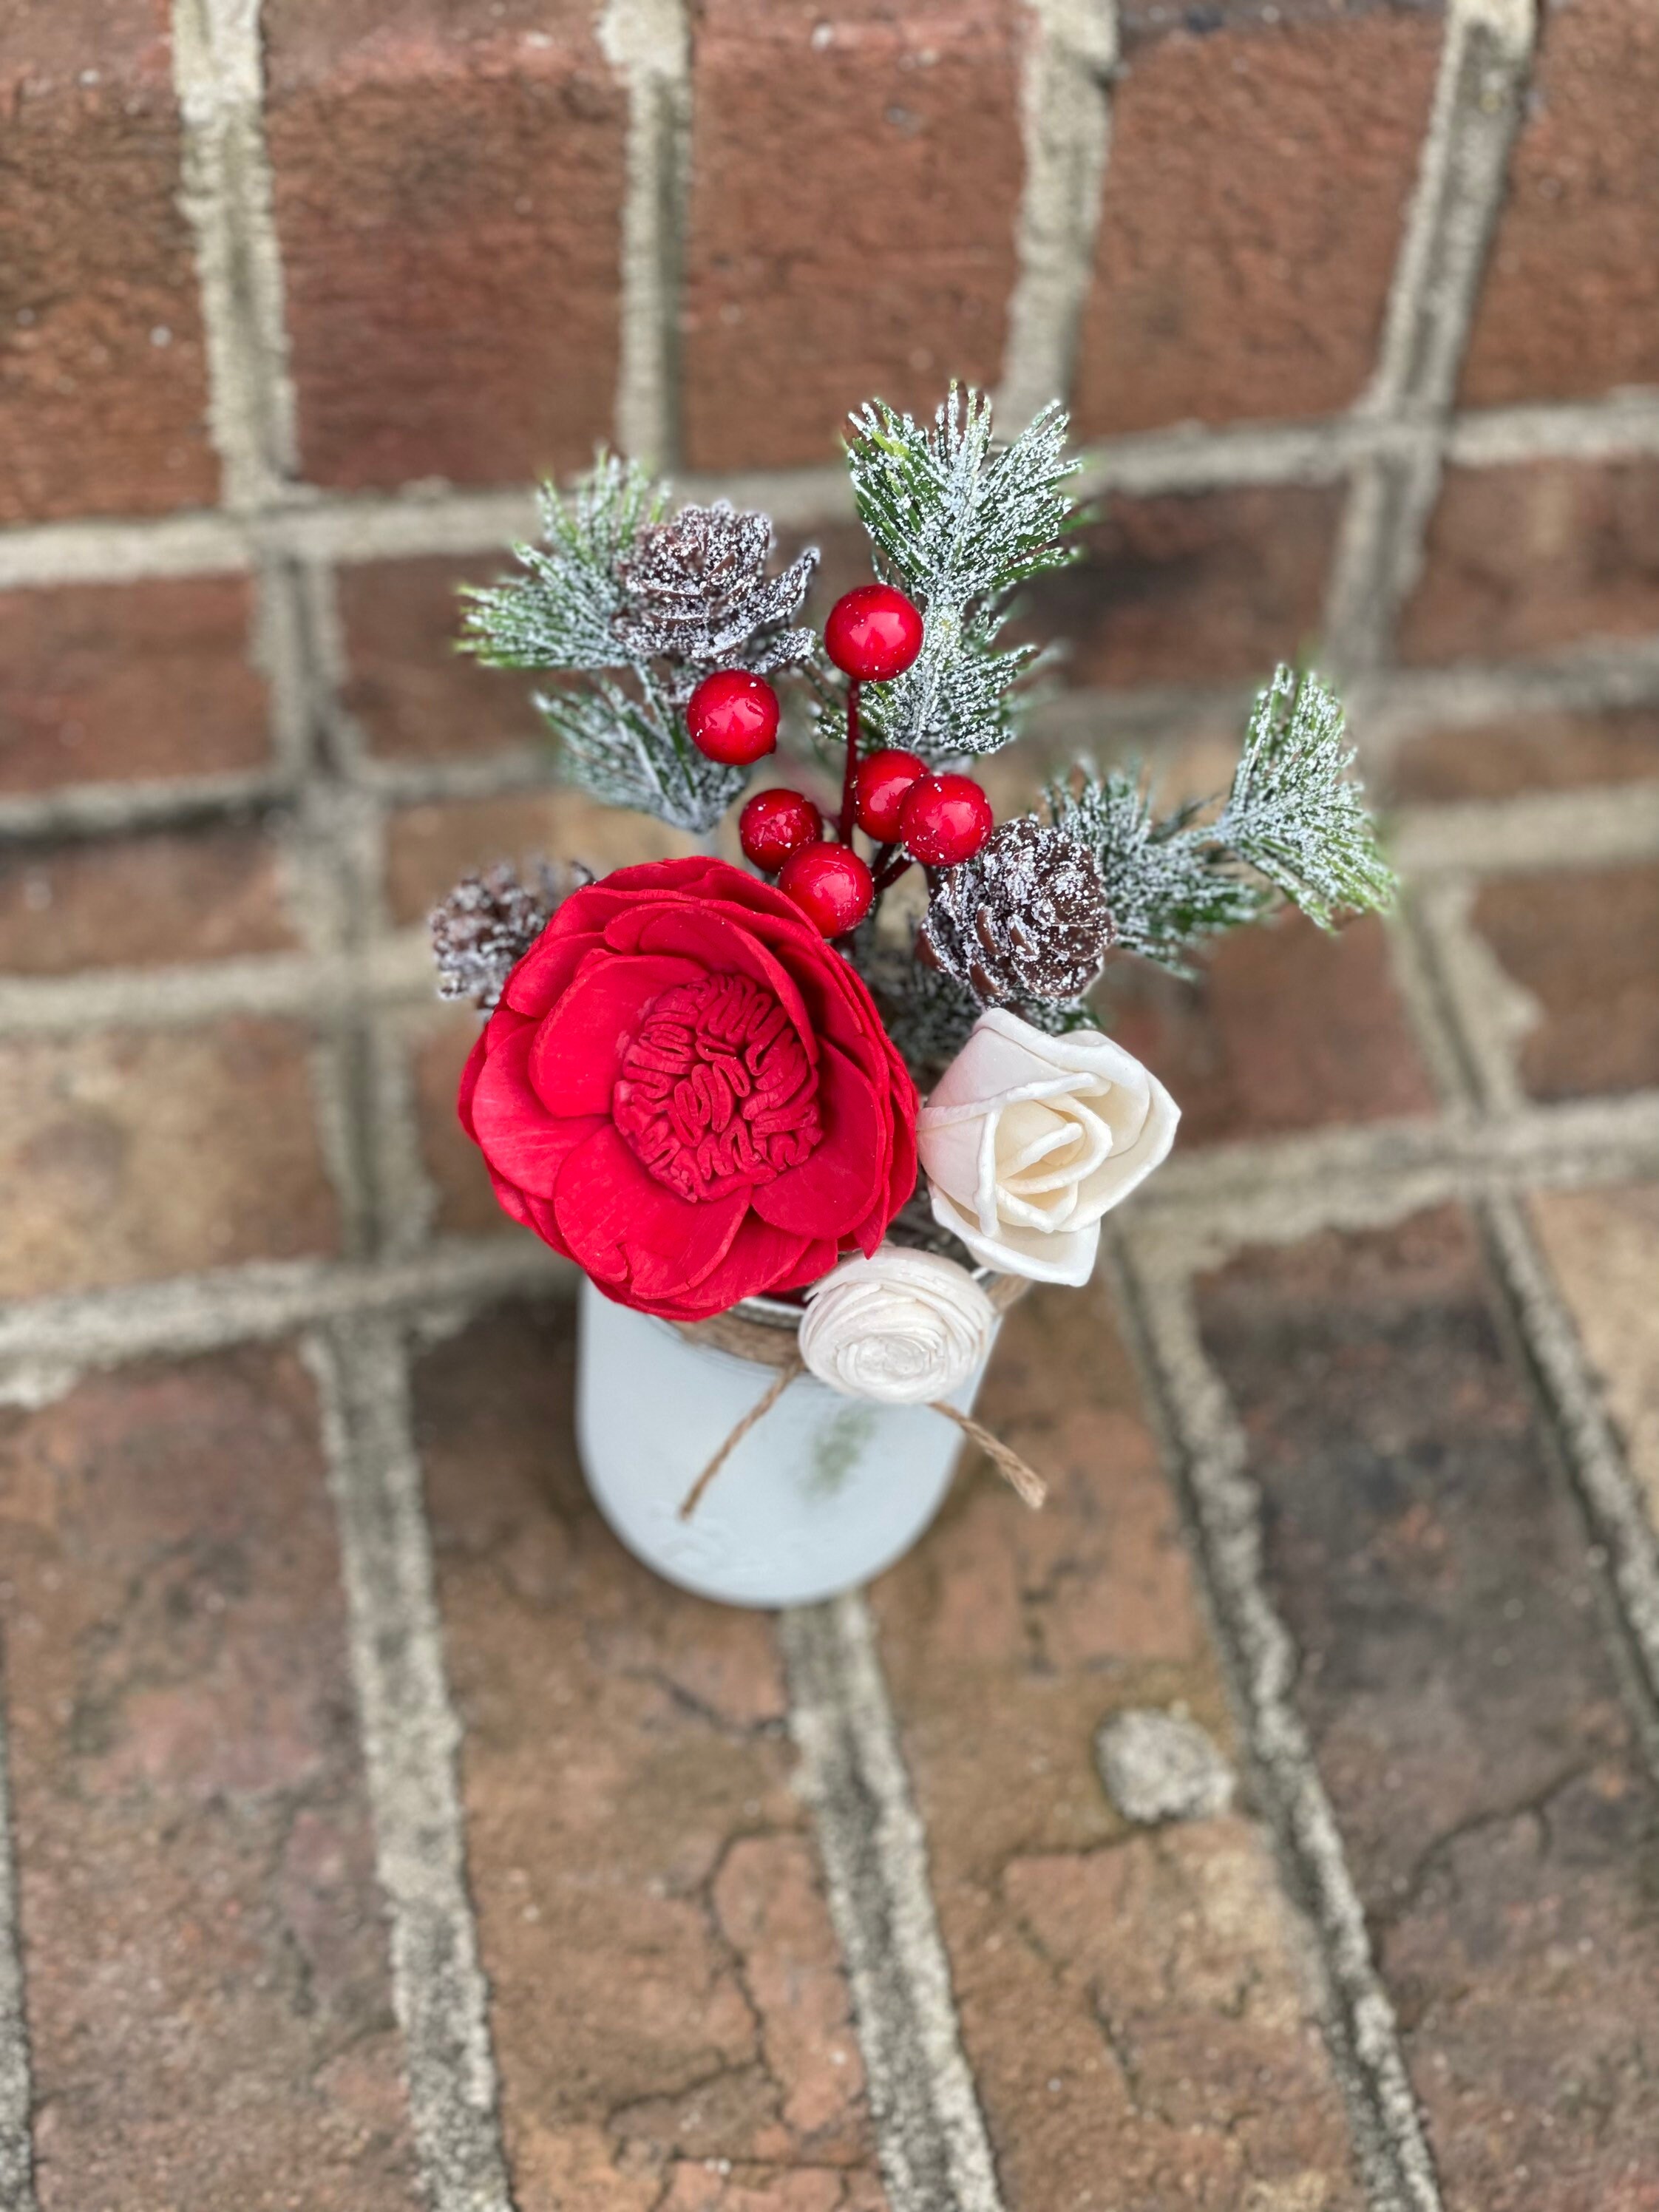 Pink Christmas Centerpiece-elegant Christmas Floral Arrangement-french  Country Christmas Home Decor-holiday Pink Peony Floral-red Plaid Pail 